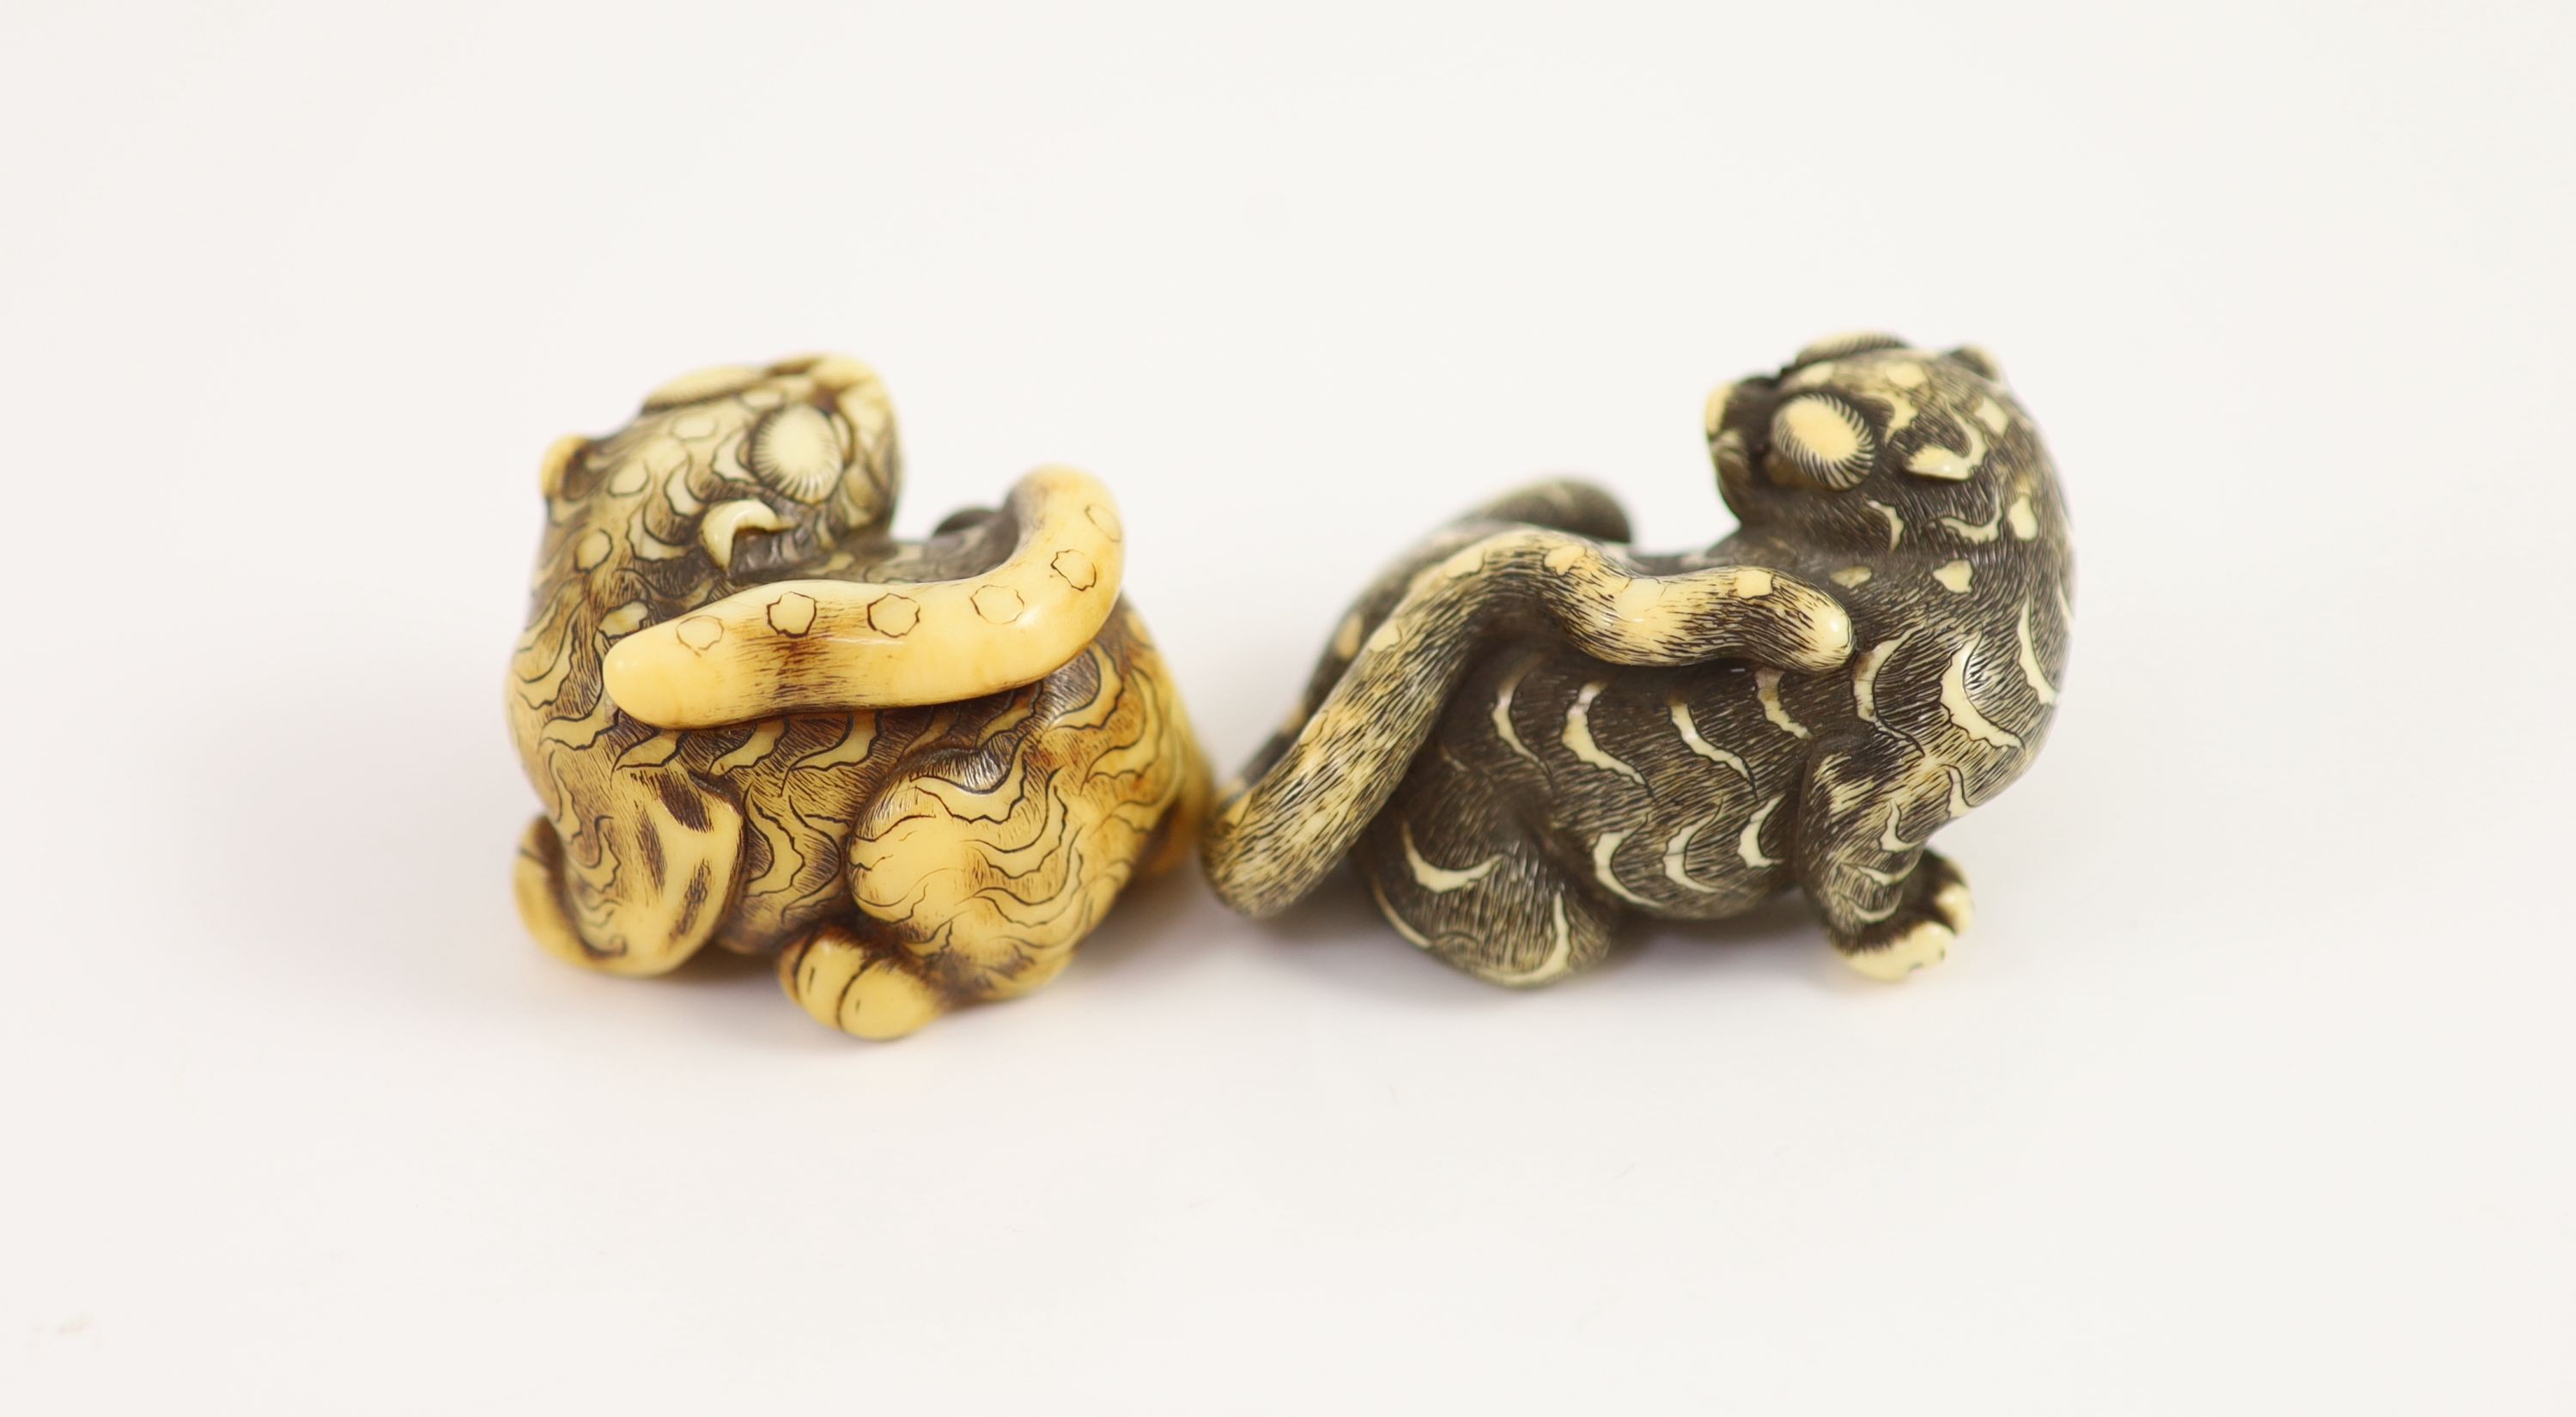 Two Japanese ivory netsuke of a tiger, Edo period, first half 19th century, 4cm and 5cm